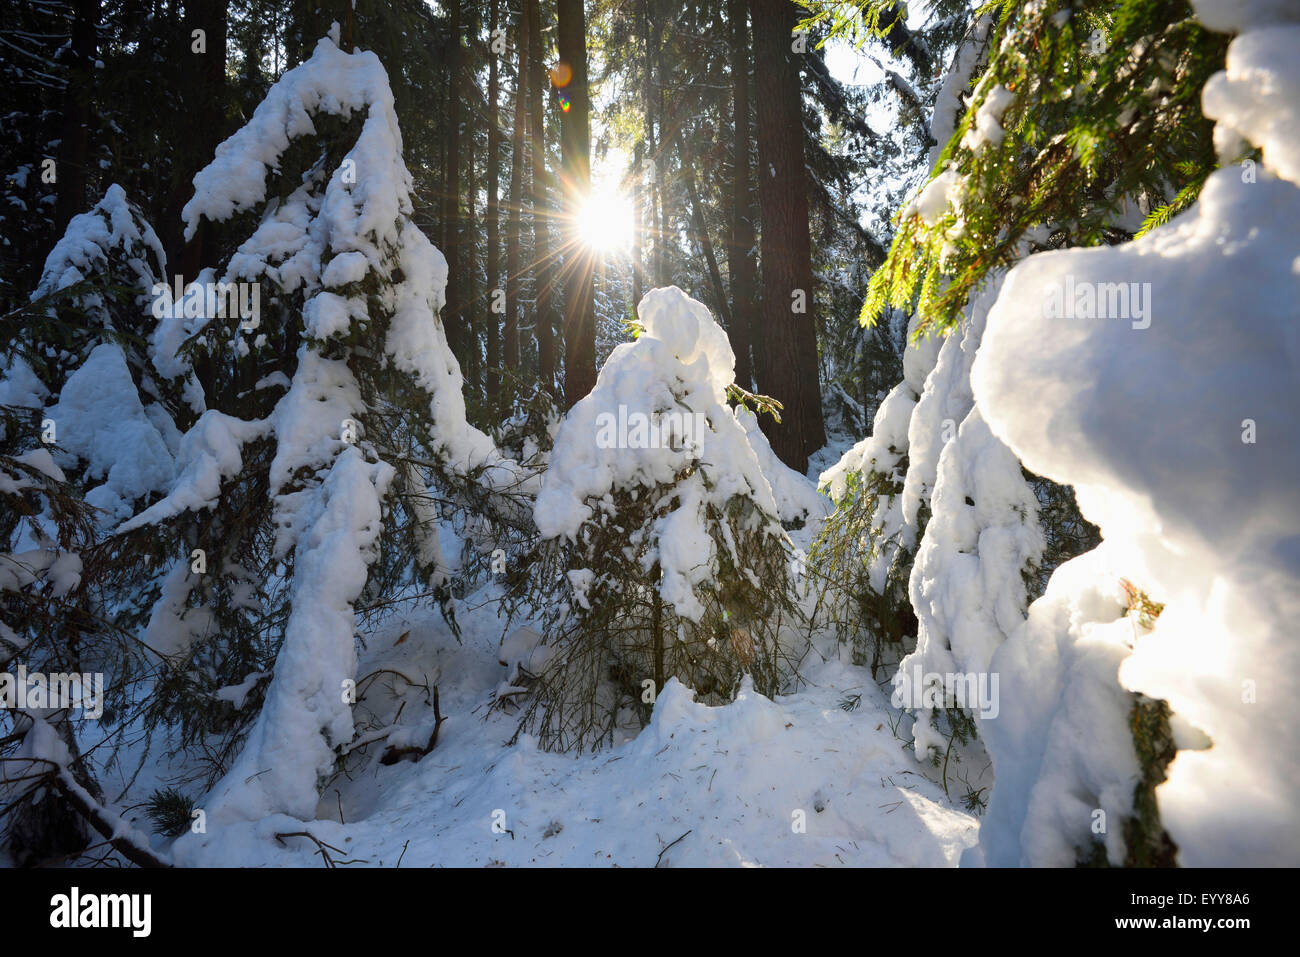 Norway spruce (Picea abies), snowy Norway spruce forest on a sunny day in winter, Germany, Bavaria Stock Photo